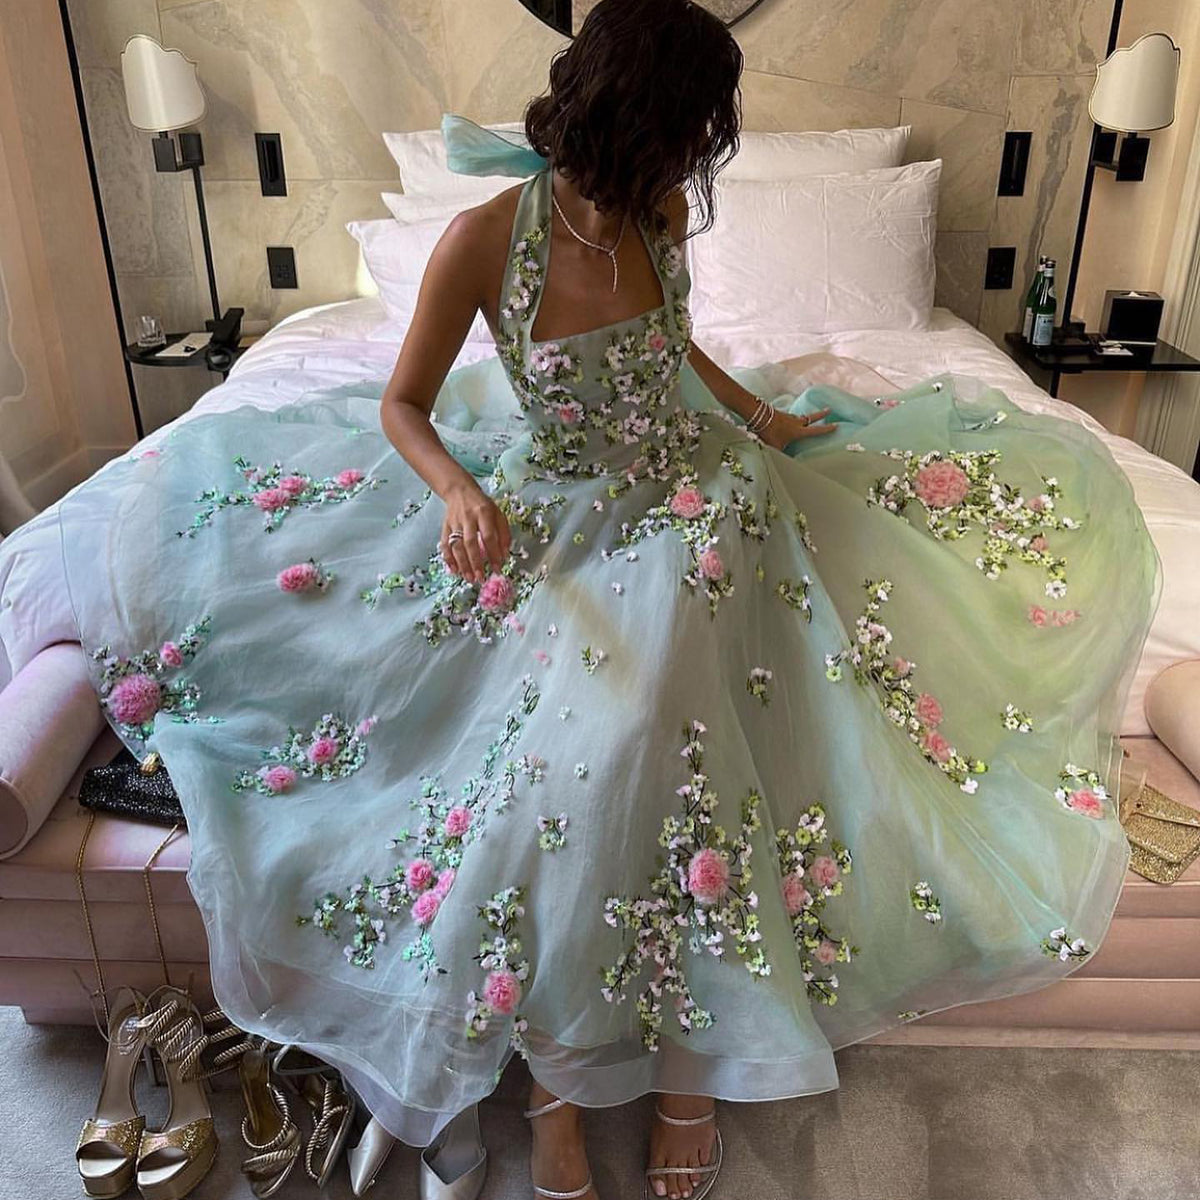 Sharon Said Chic 3D Flowers Halter Aqua Evening Dresses for Women Wedding Party A-line Ankle Length Midi Formal Prom Gowns SS219